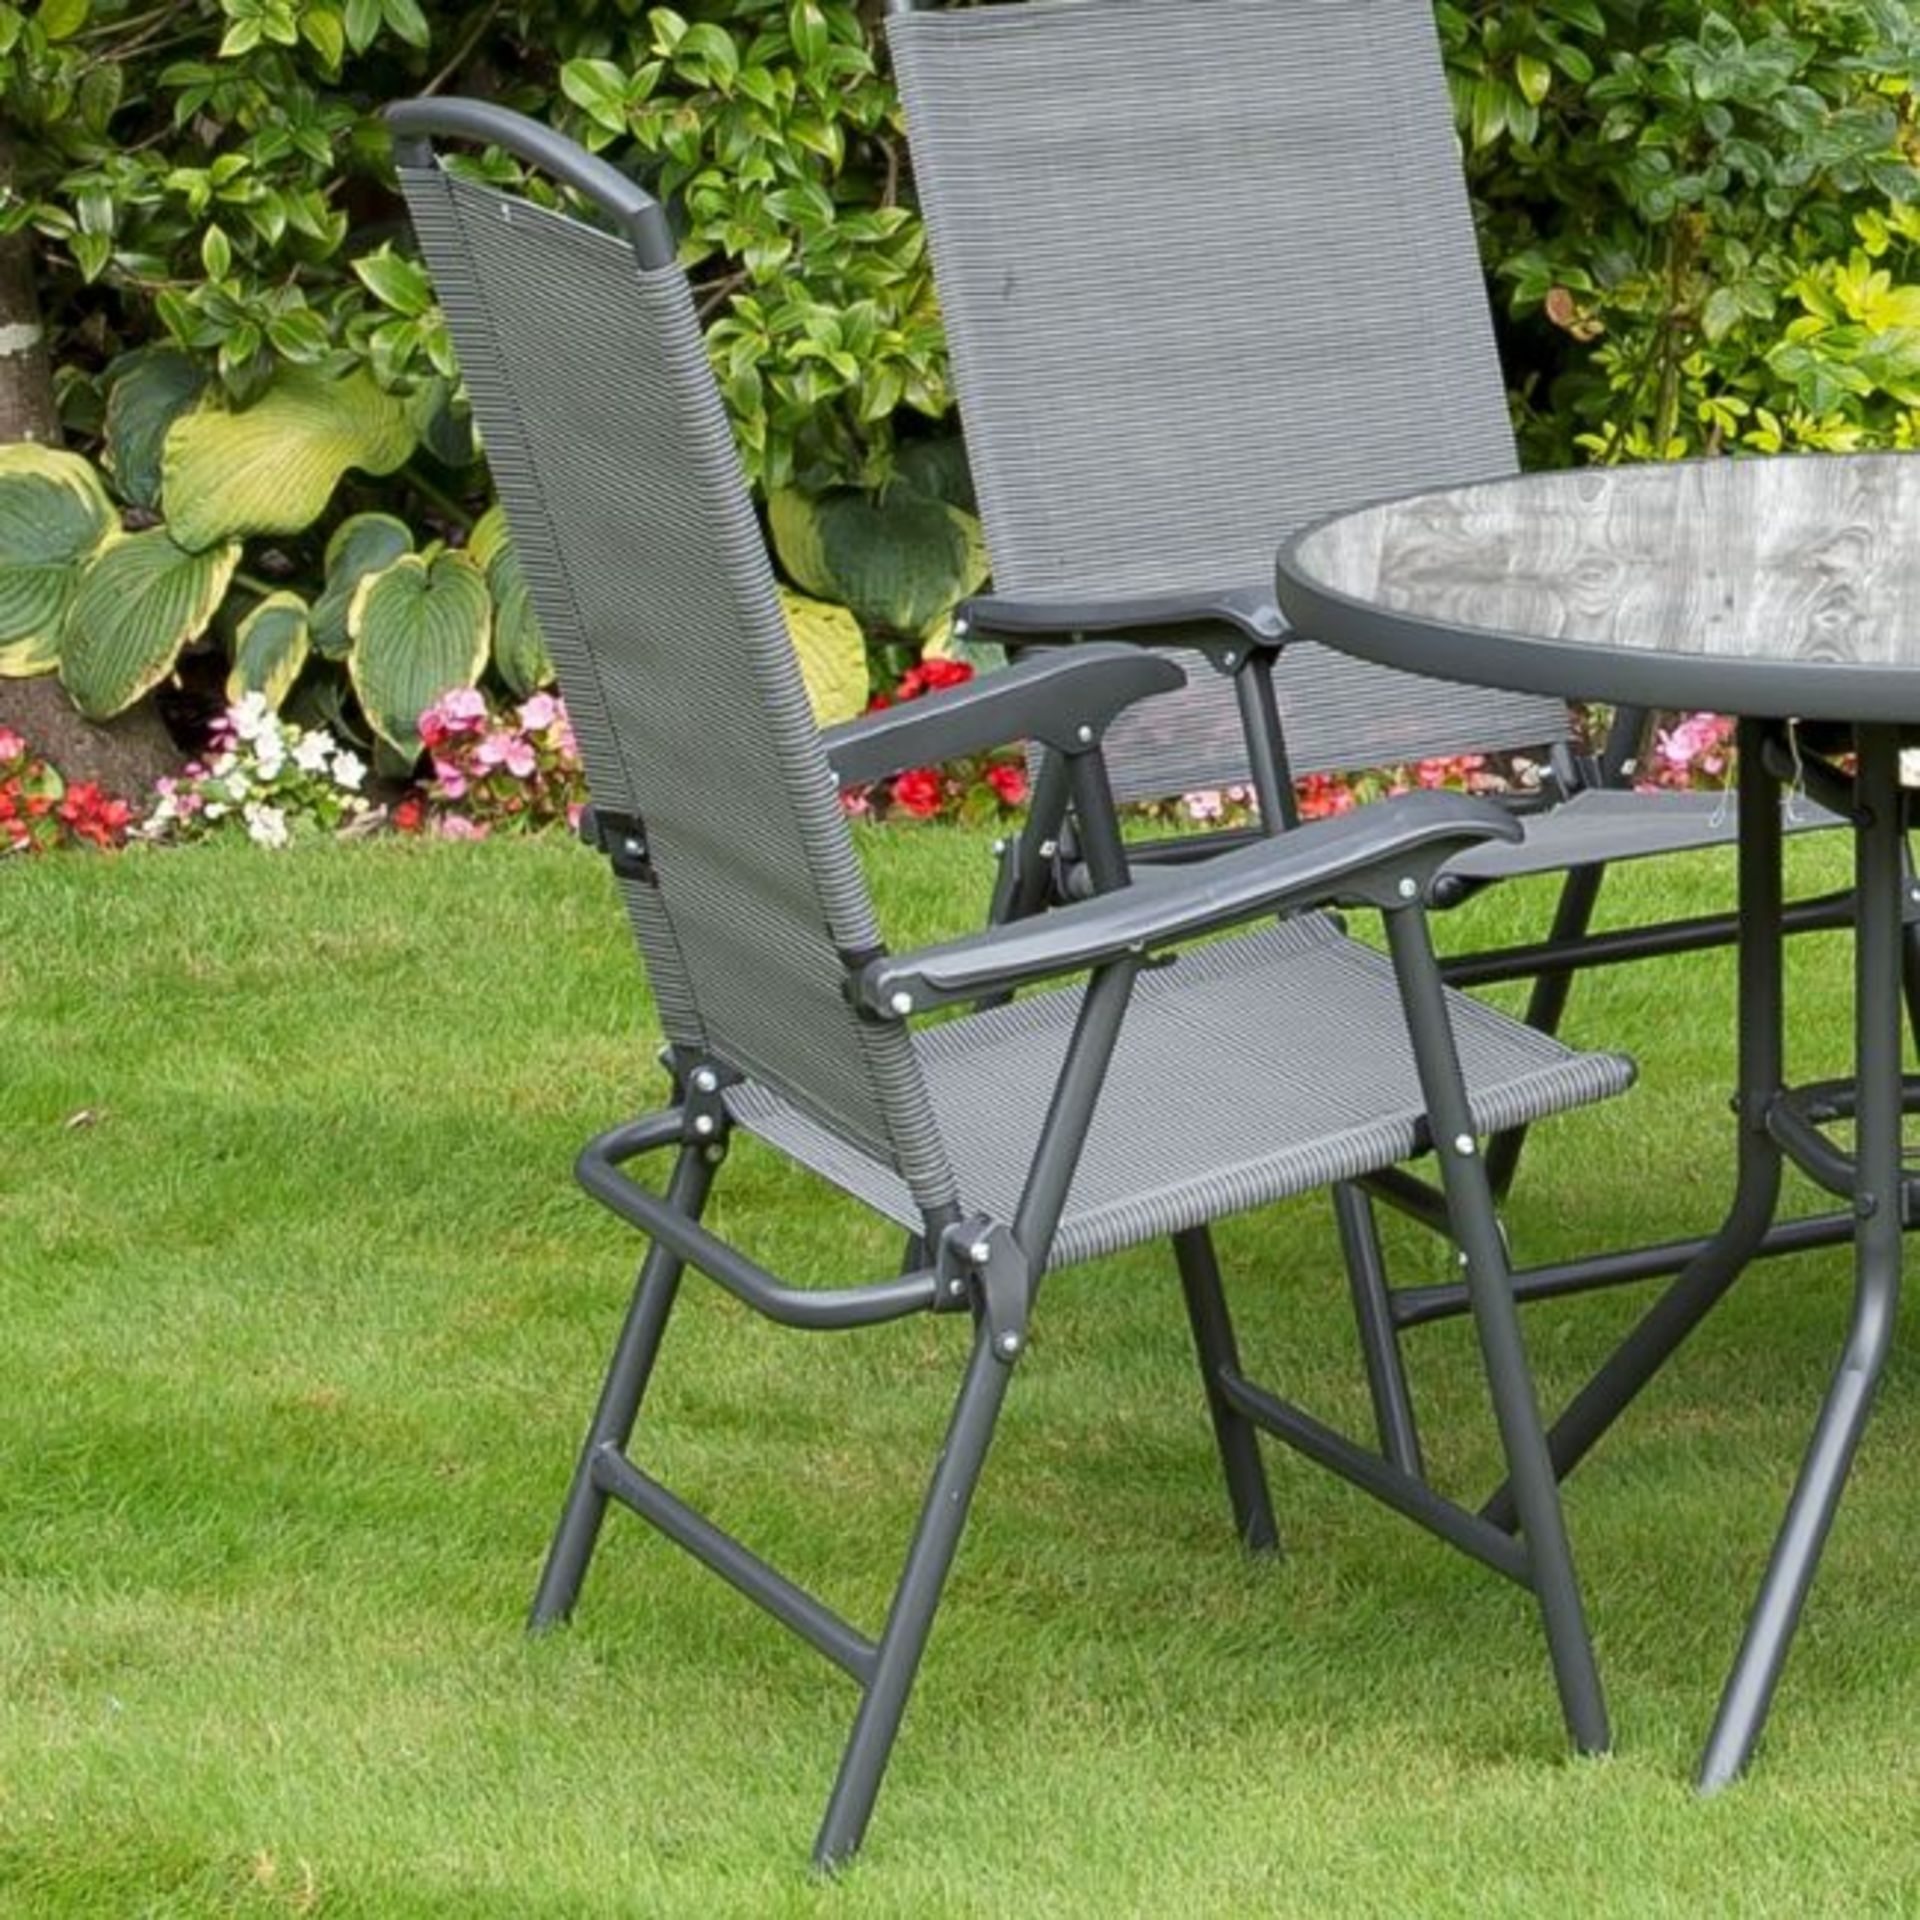 Havana Charcoal Deluxe 4 Seater Dining Set - GF07704 - Image 3 of 3